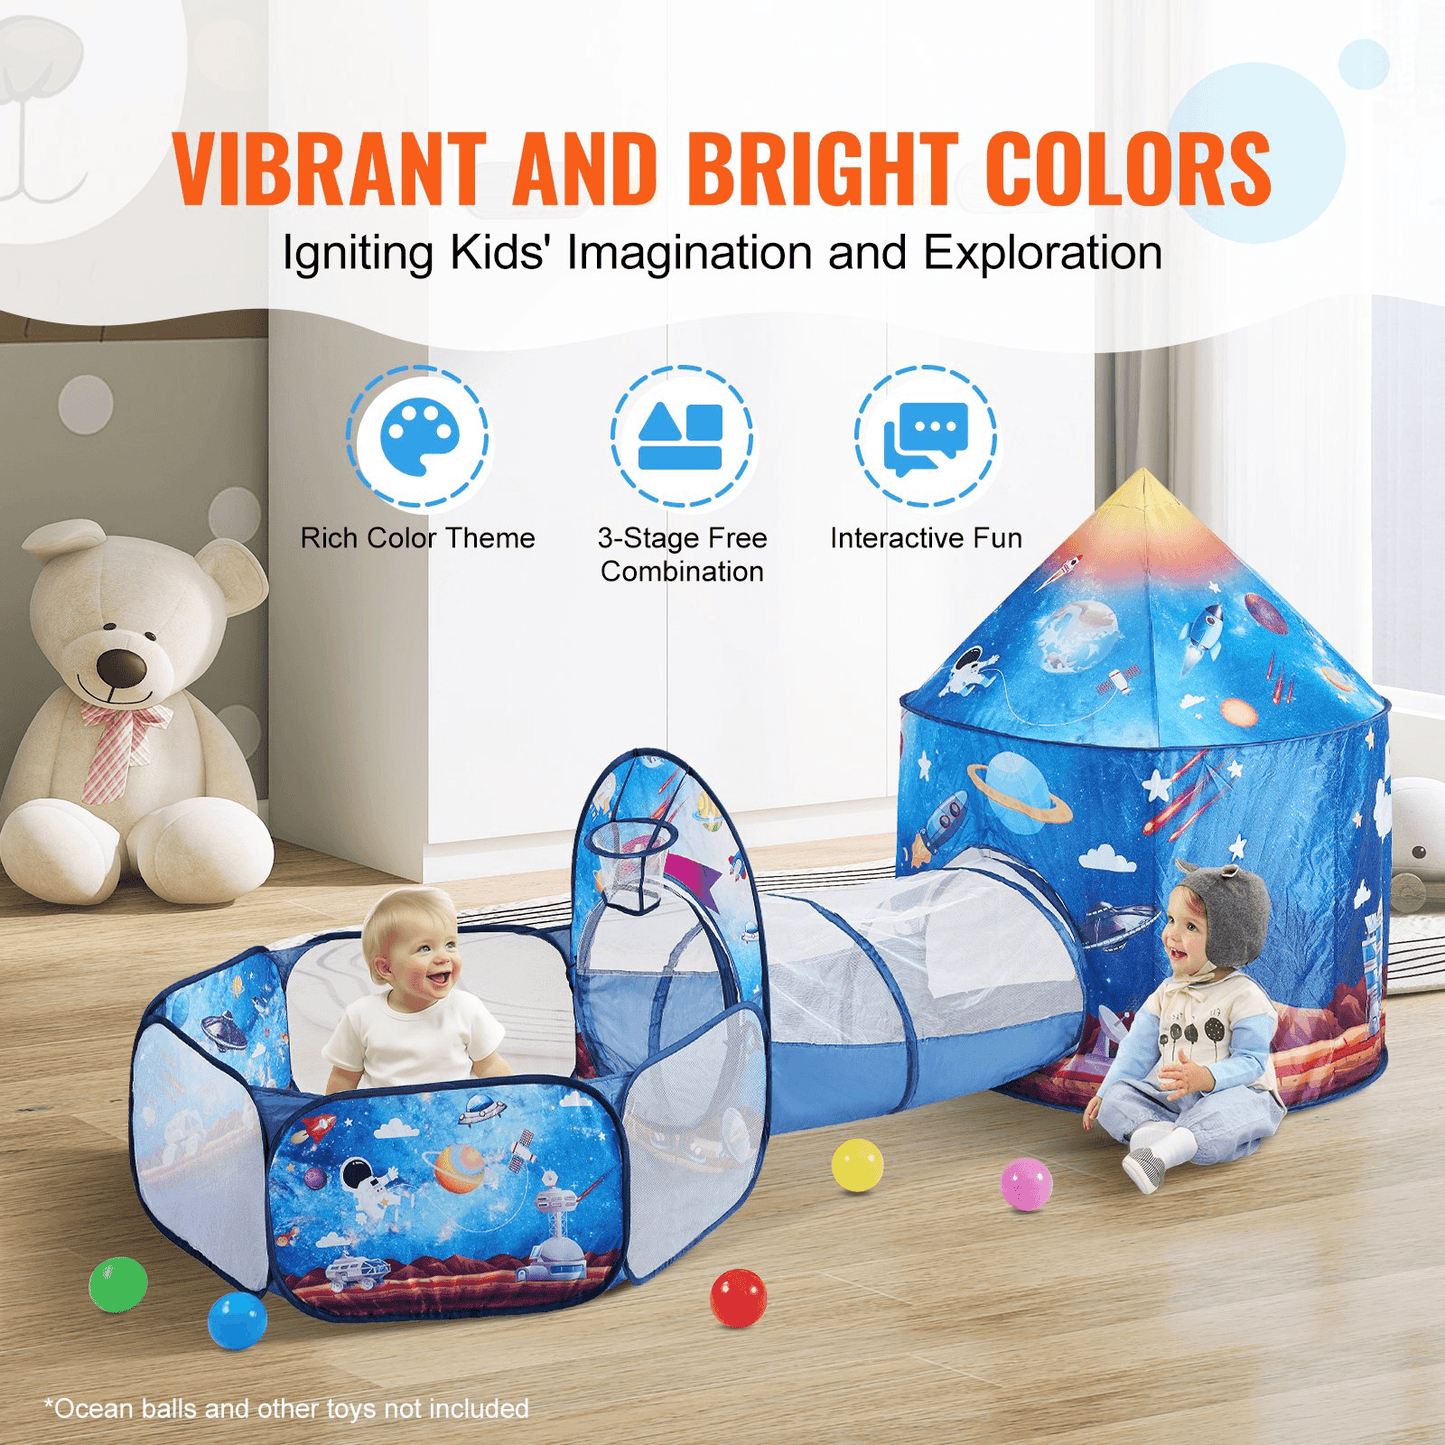 VEVOR 3 in 1 Kids Play Tent with Tunnel for Boys, Girls, Babies and Toddlers, Indoor/Outdoor Pop Up Playhouse with Carrying Bag & Banding Straps Birthday Gifts, Royal Blue Color Rocket Theme - Loomini